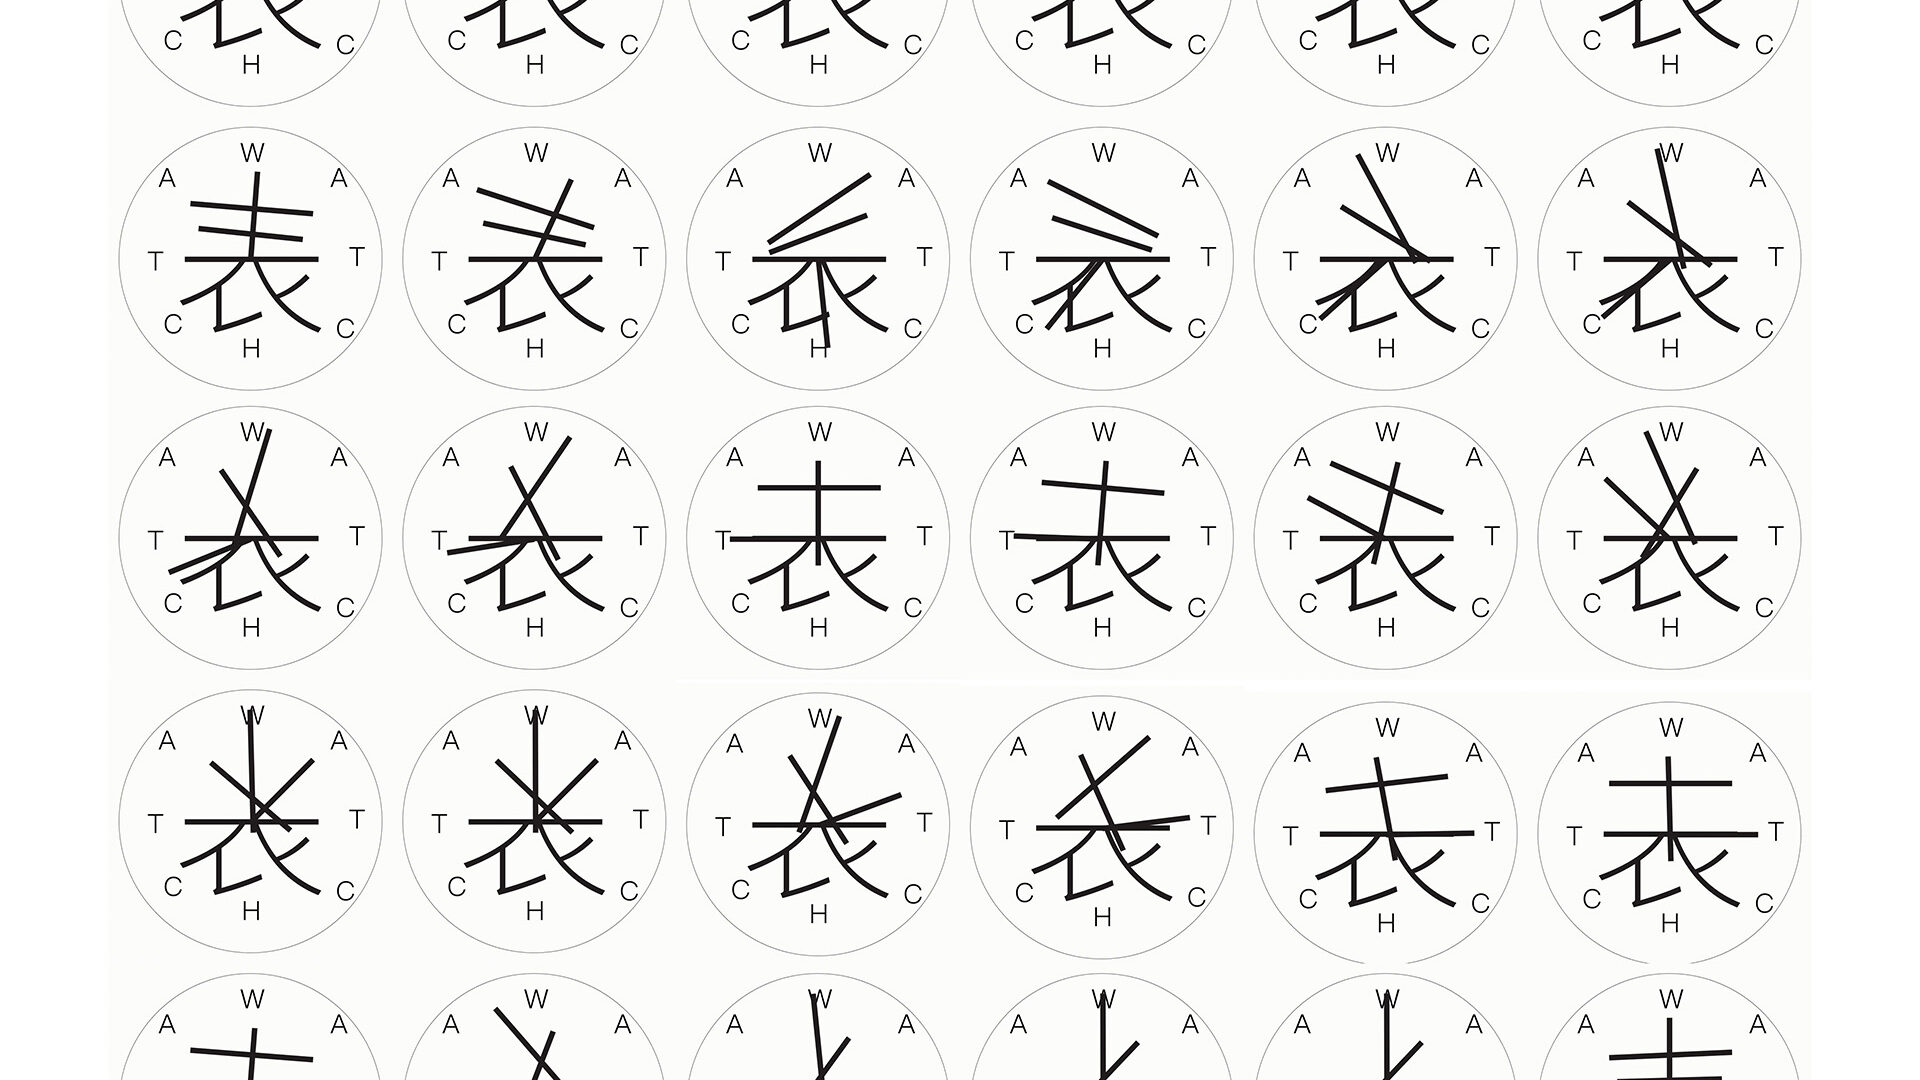 An animated exploration of the Chinese character for watch